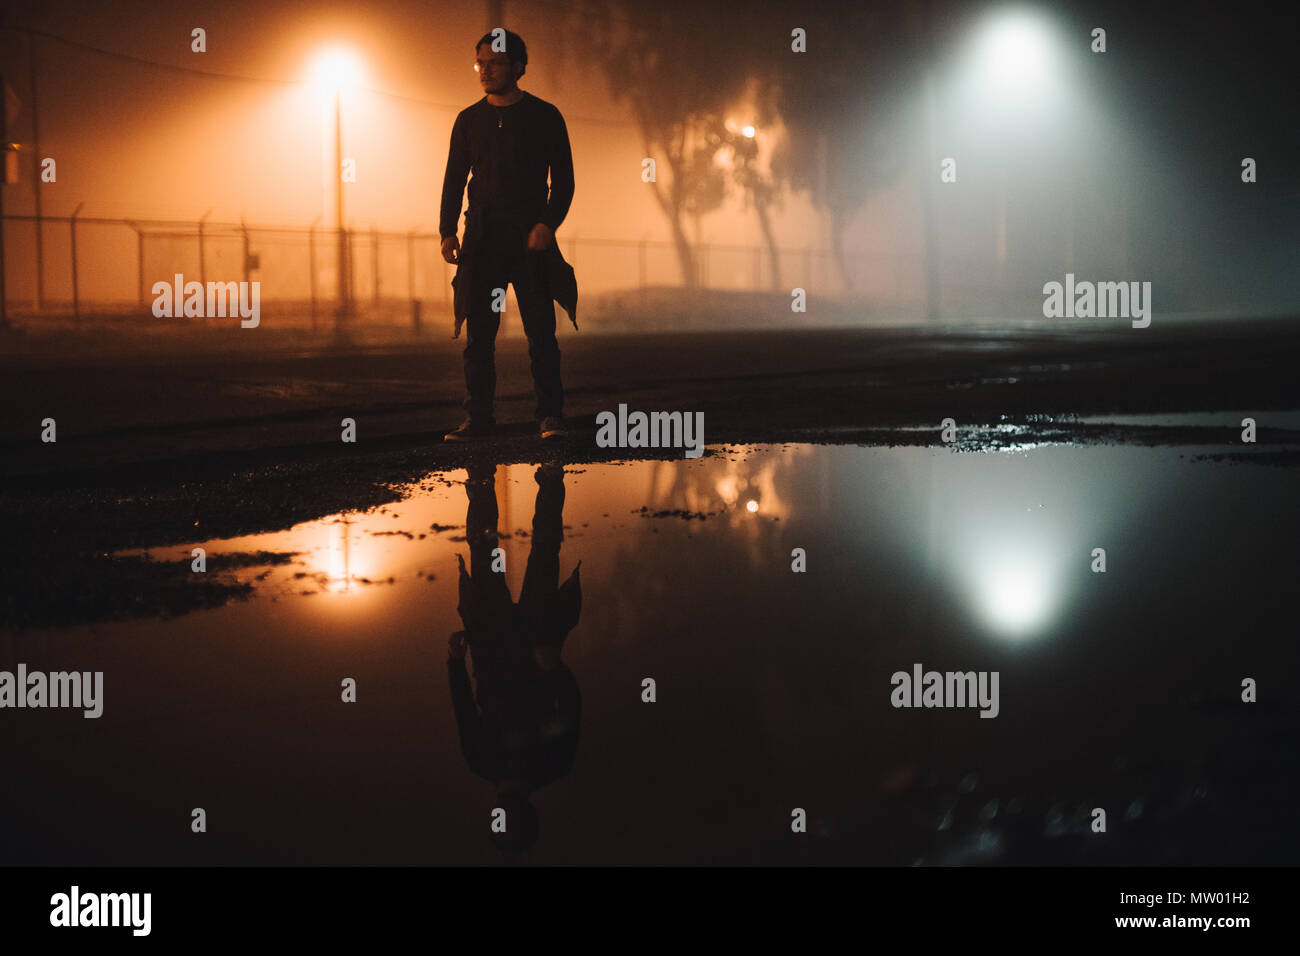 Man standing in the road by a puddle of water at night, California, United States Stock Photo